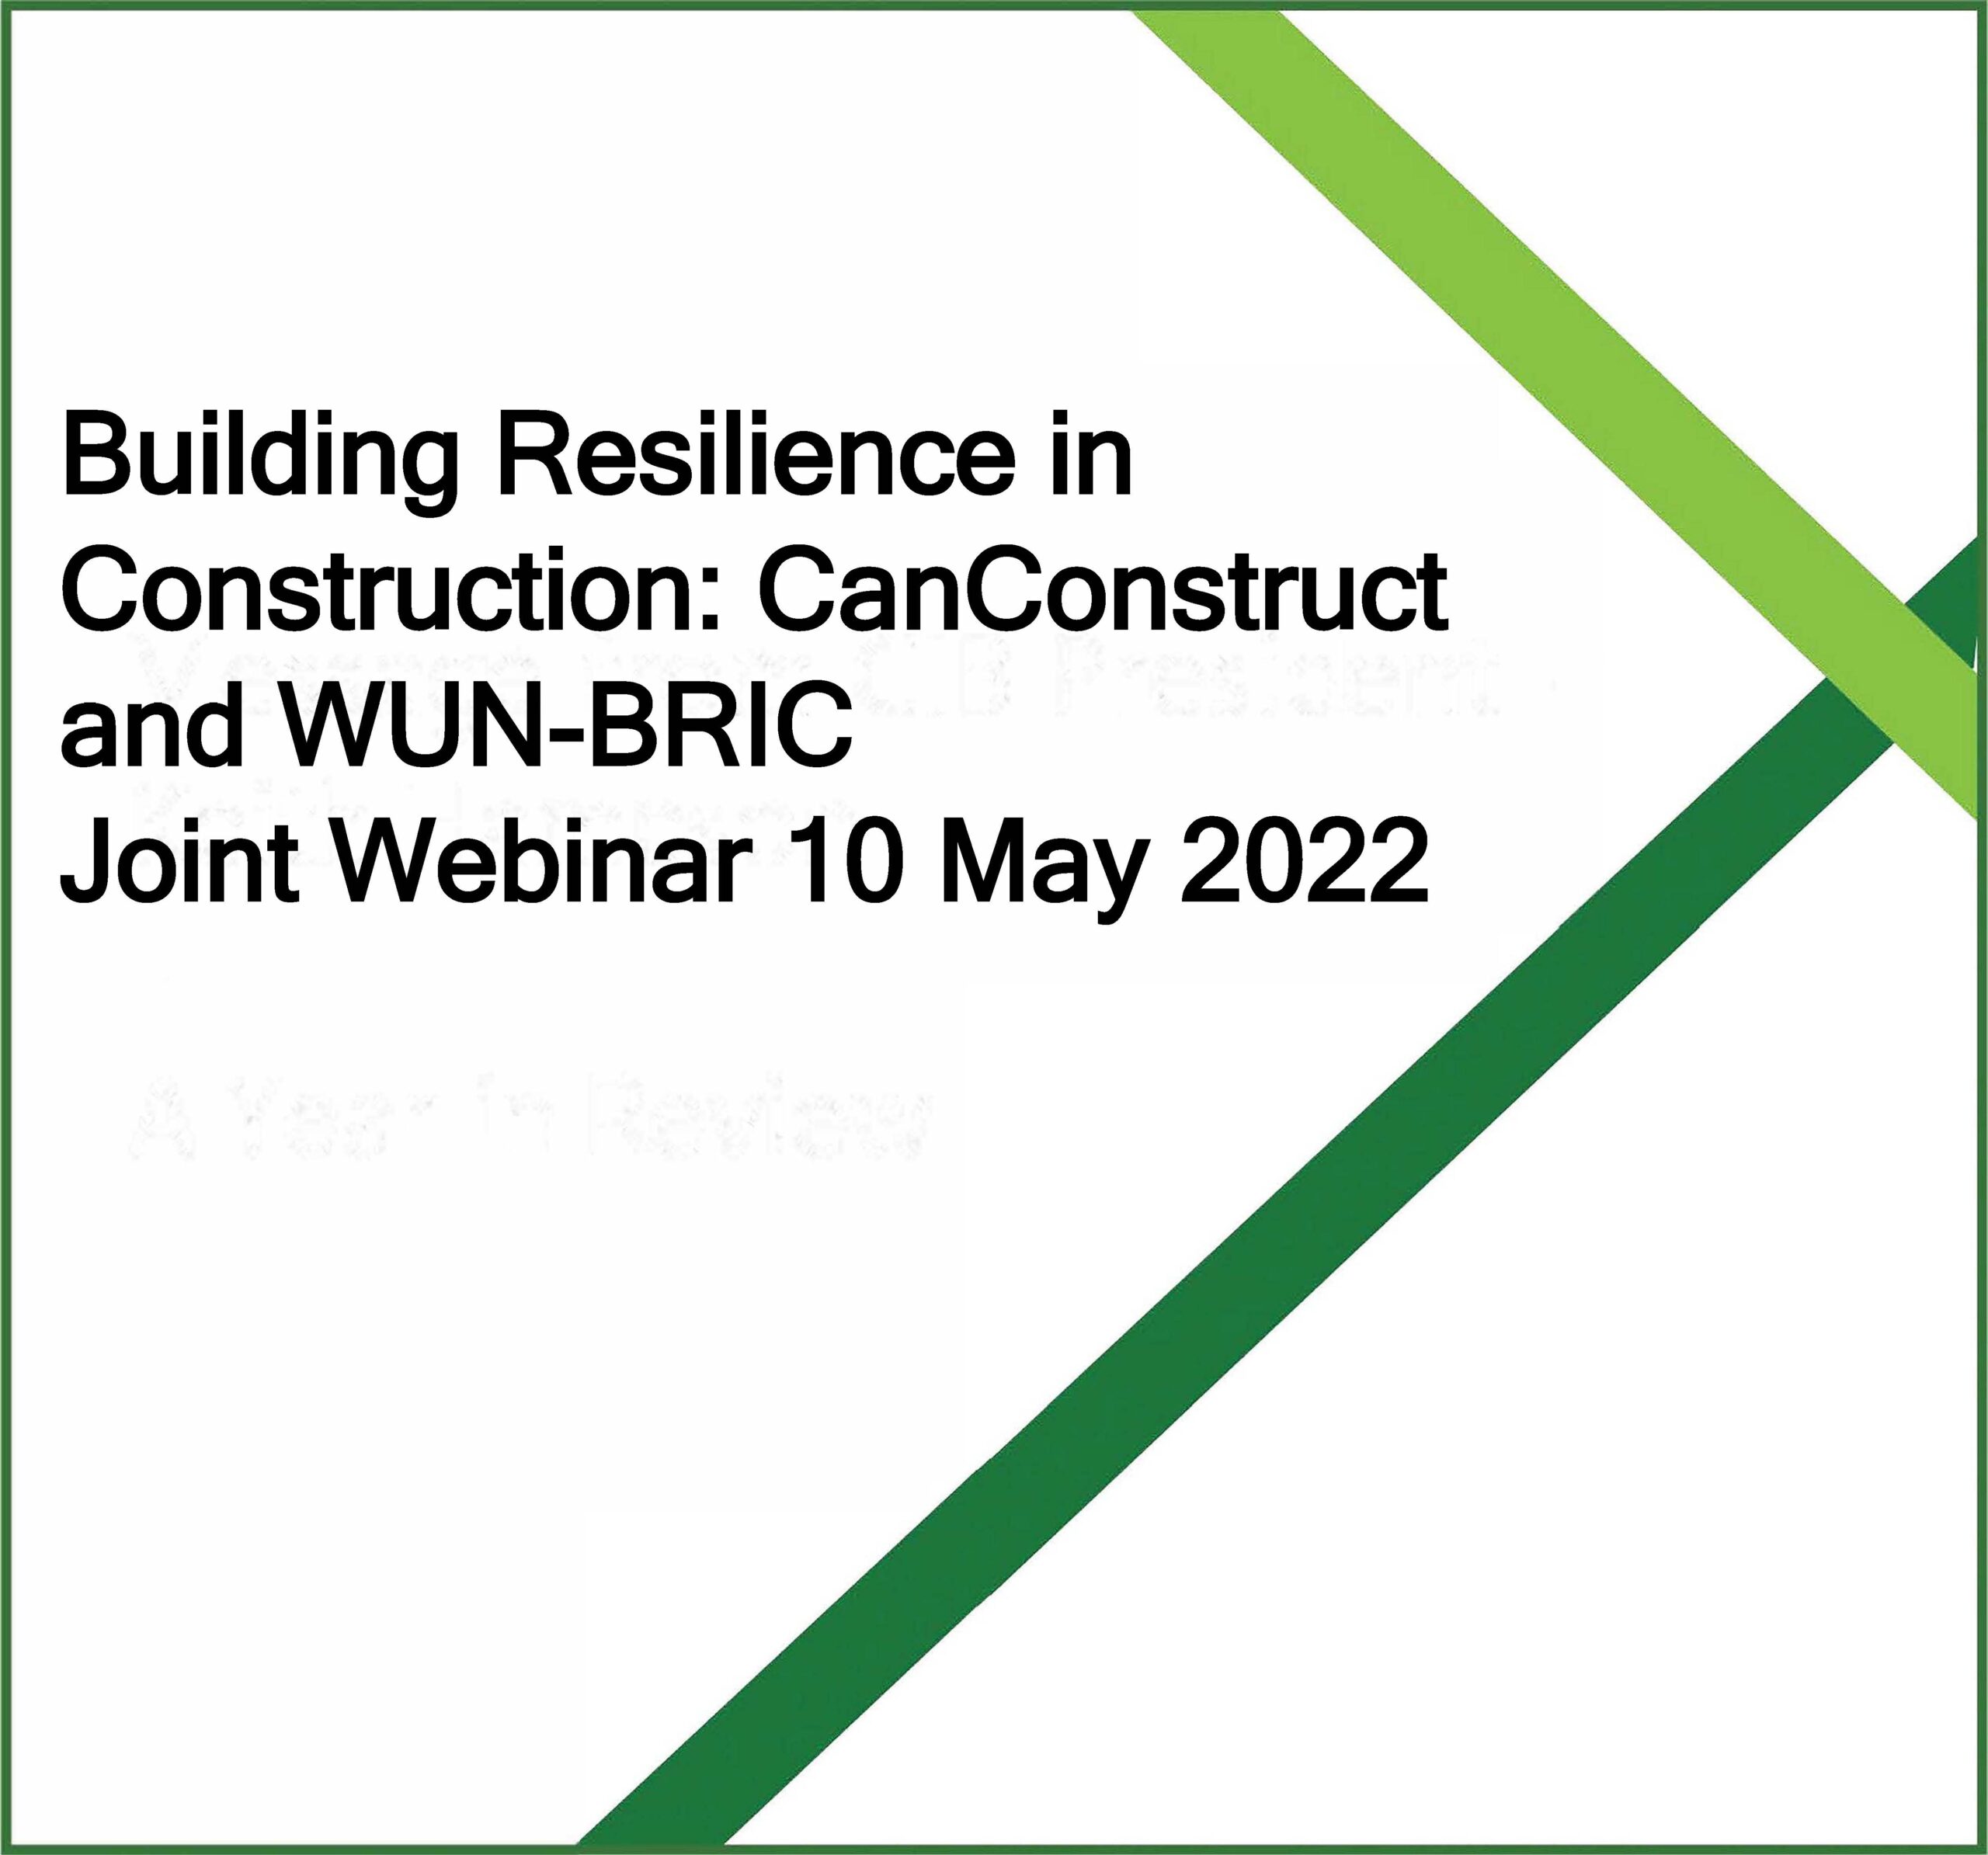 Building Resilience in Construction: CanConstruct and WUN-BRIC Joint Webinar 10 May 2022